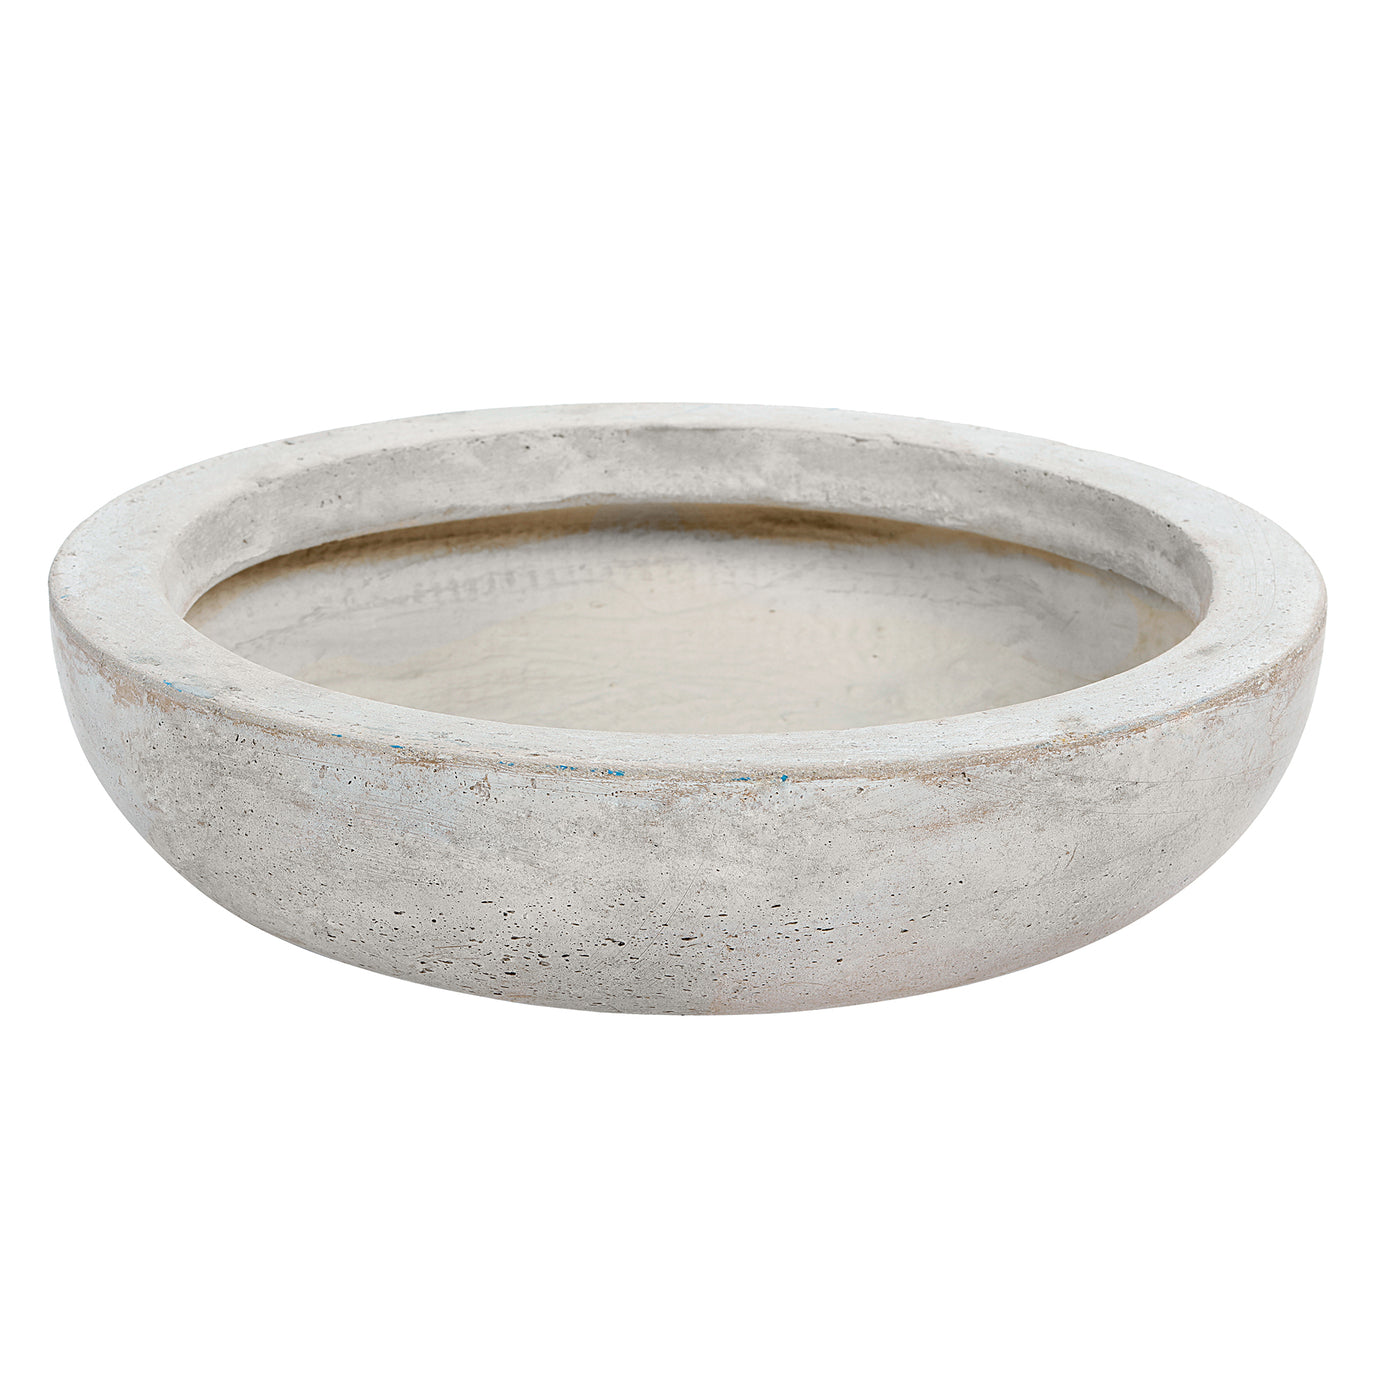 High-quality stonecast low bowl in light grey